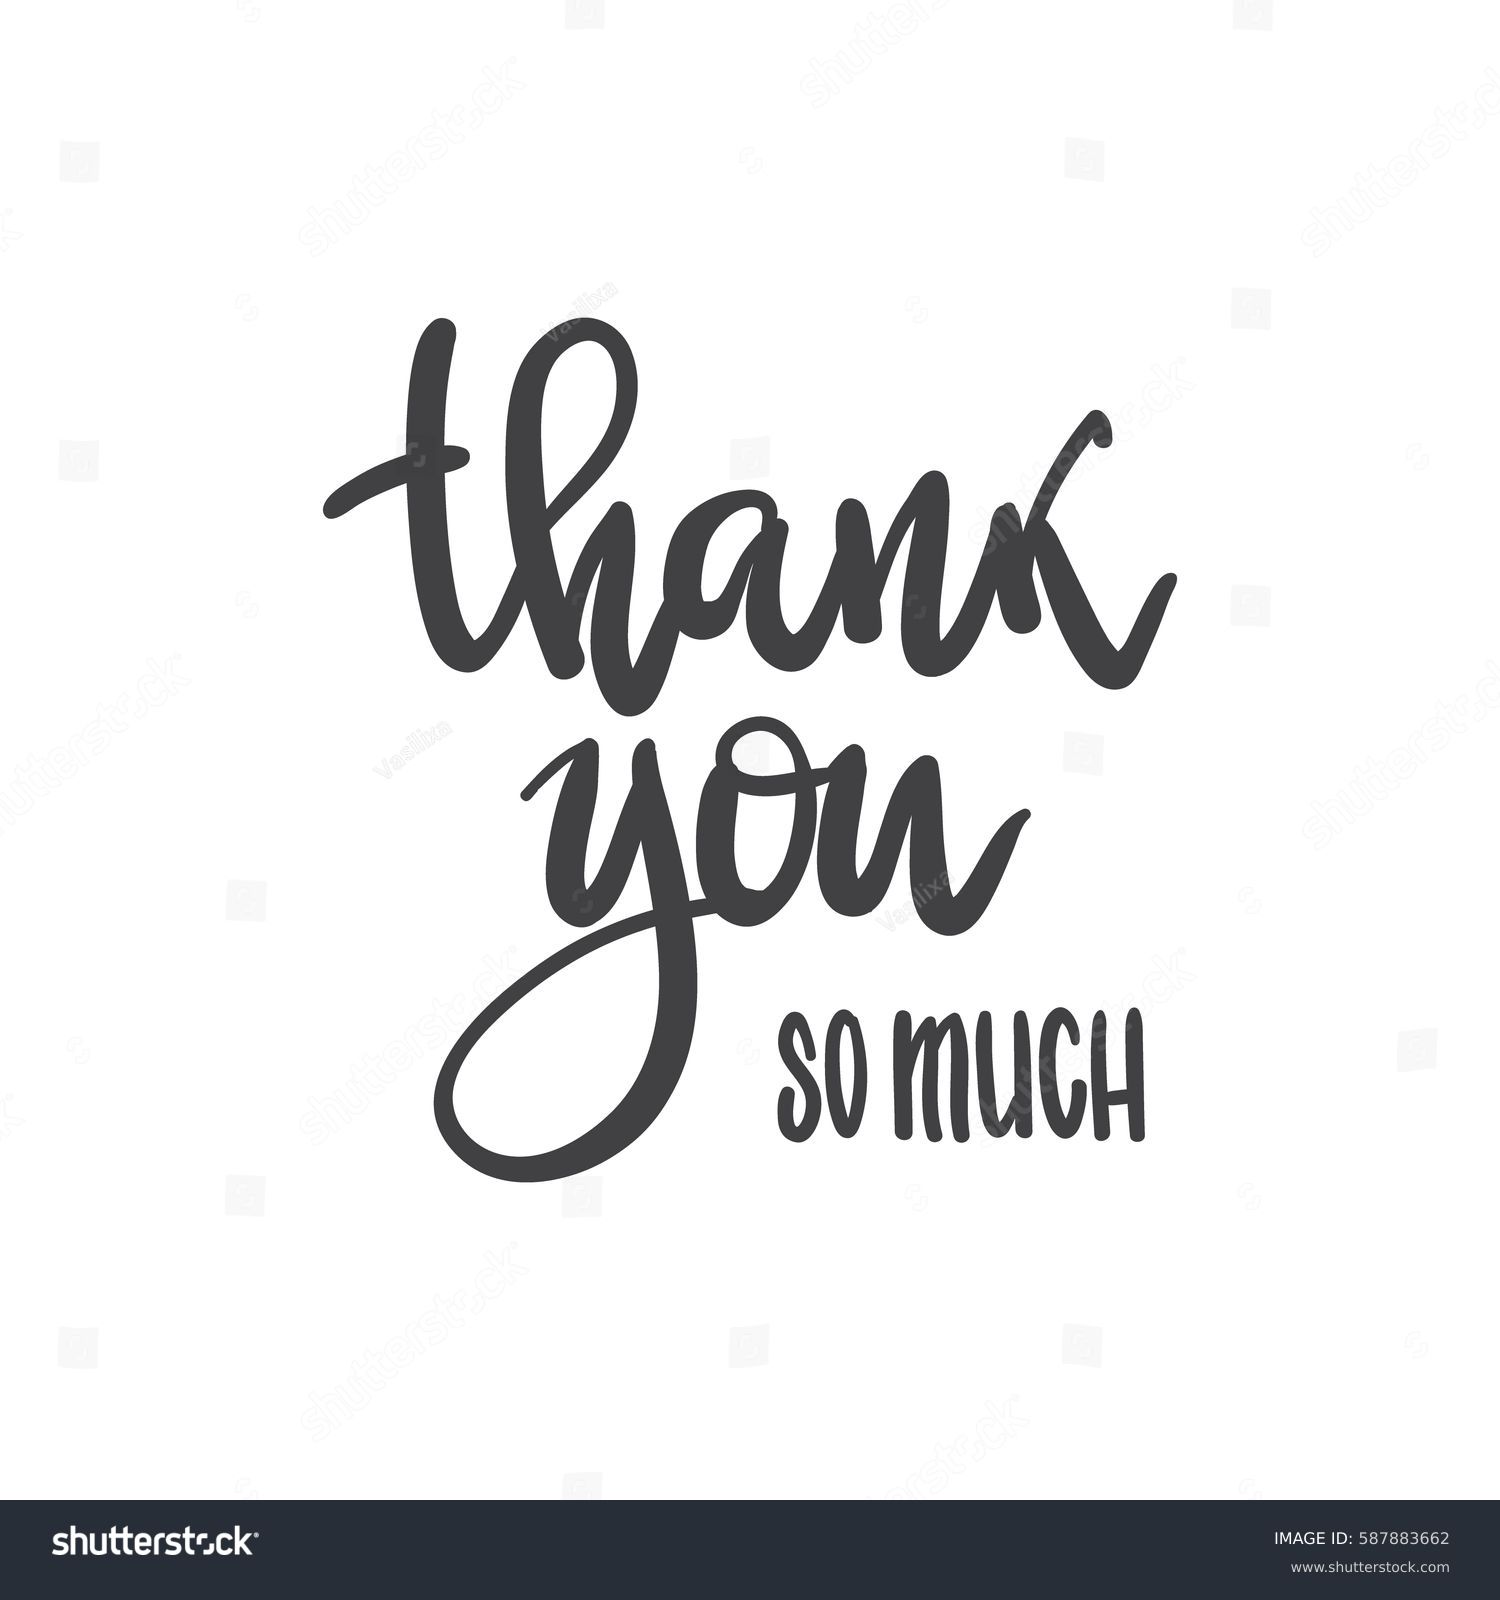 vector free download thank you - photo #49